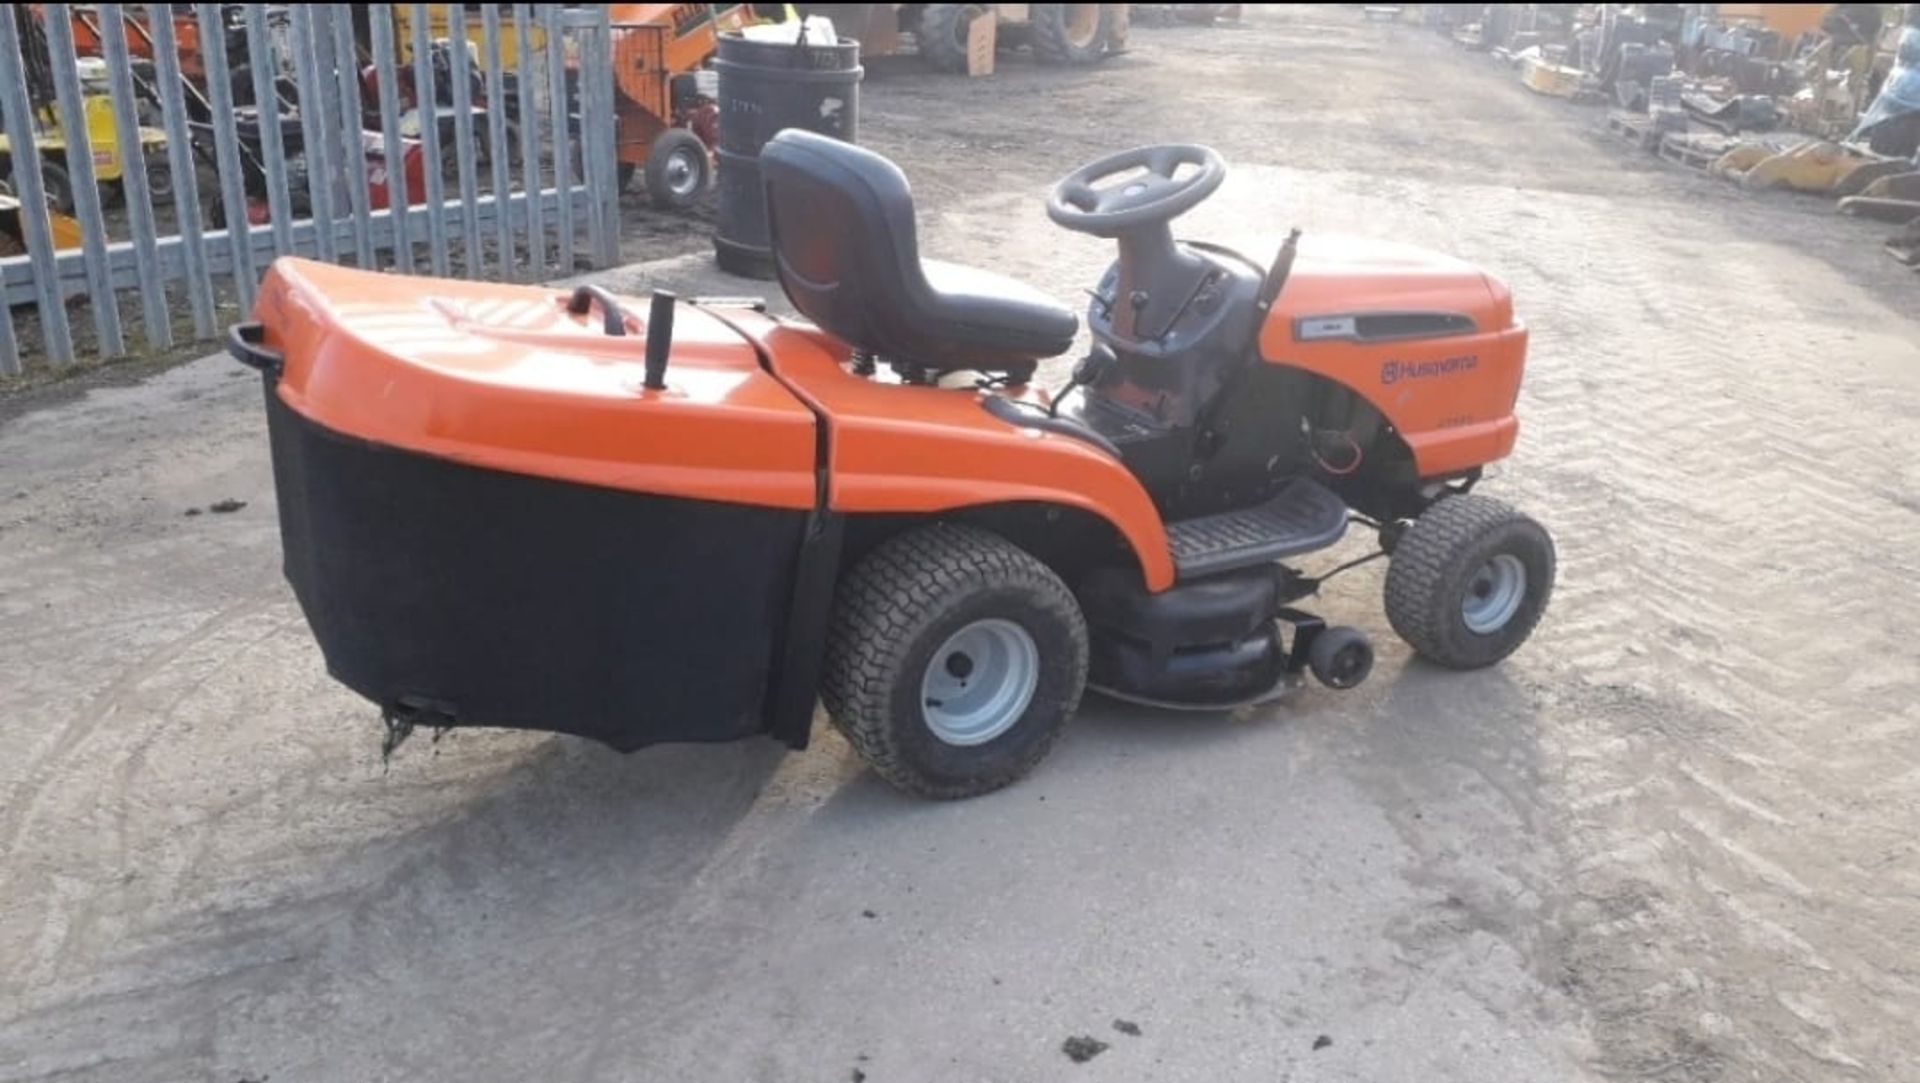 2006 HUSQVARNA CT151 PETROL WORKING ORDER, COMES WITH GRASS BOX *NO VAT* - Image 3 of 8